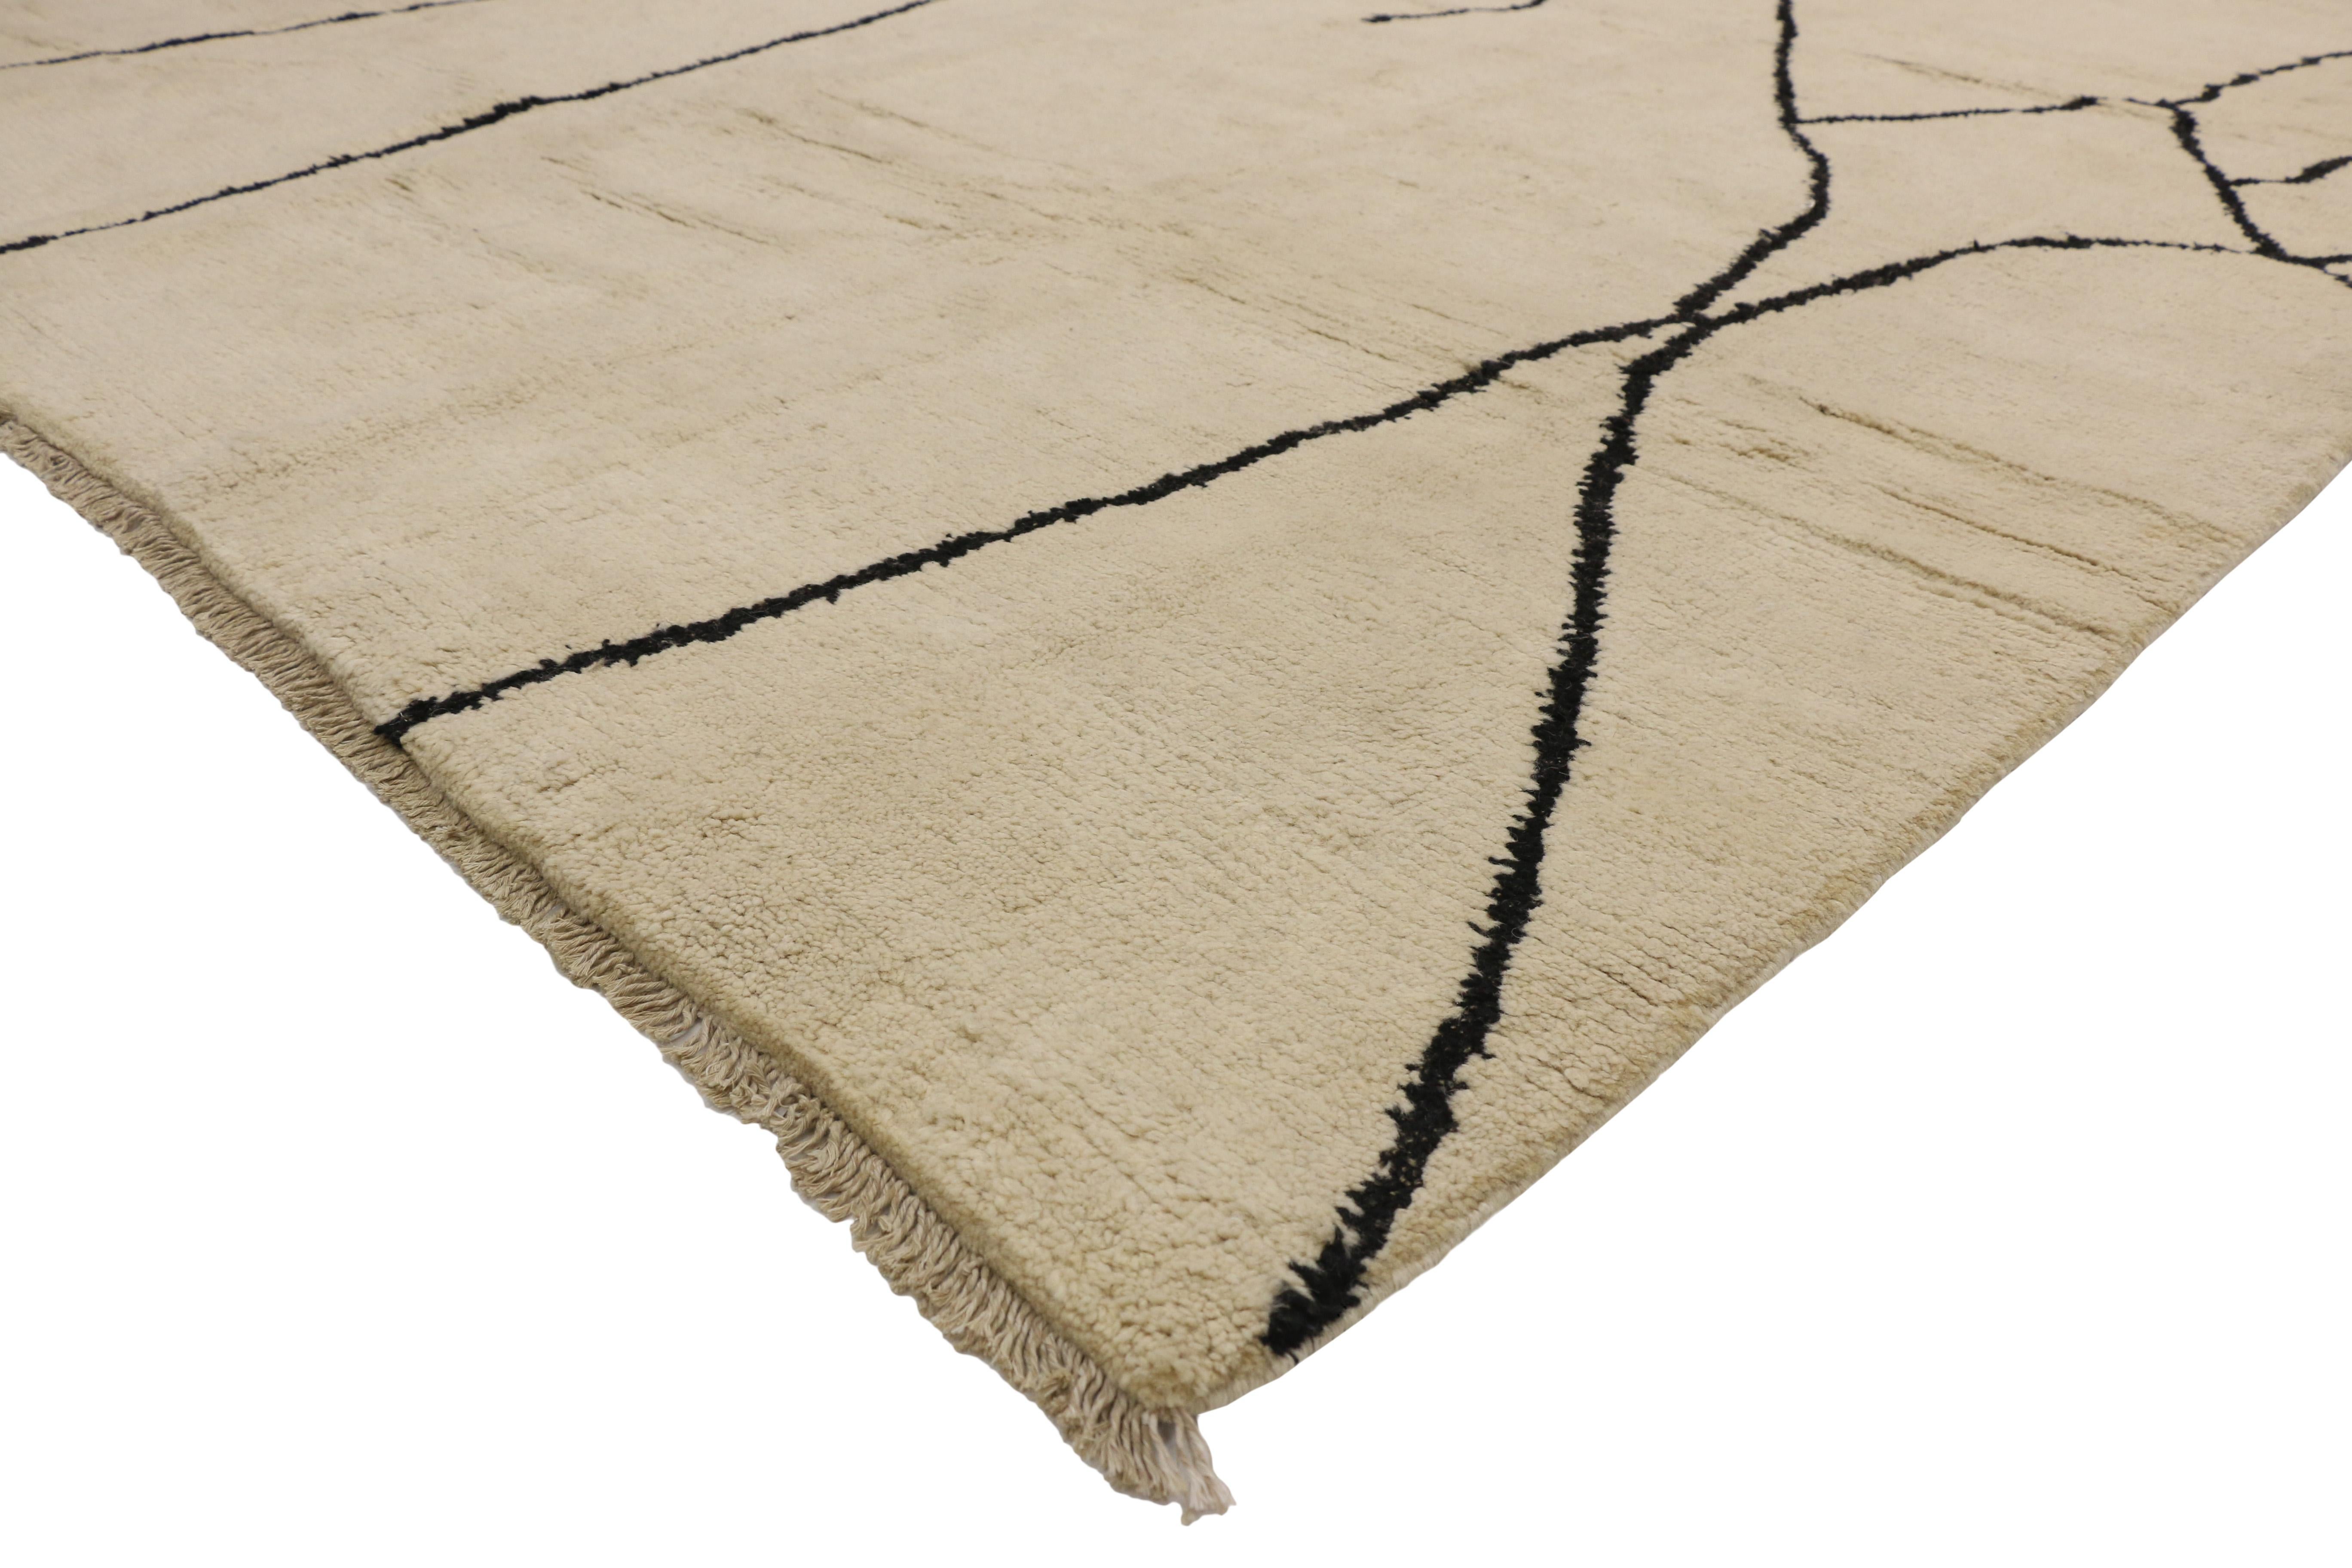 80509 New Contemporary Moroccan Area rug with Line Art Design and Tribal style. This hand knotted wool contemporary Moroccan area rug with line art design and tribal style features vertical black lines running the length of the sandy-beige backdrop